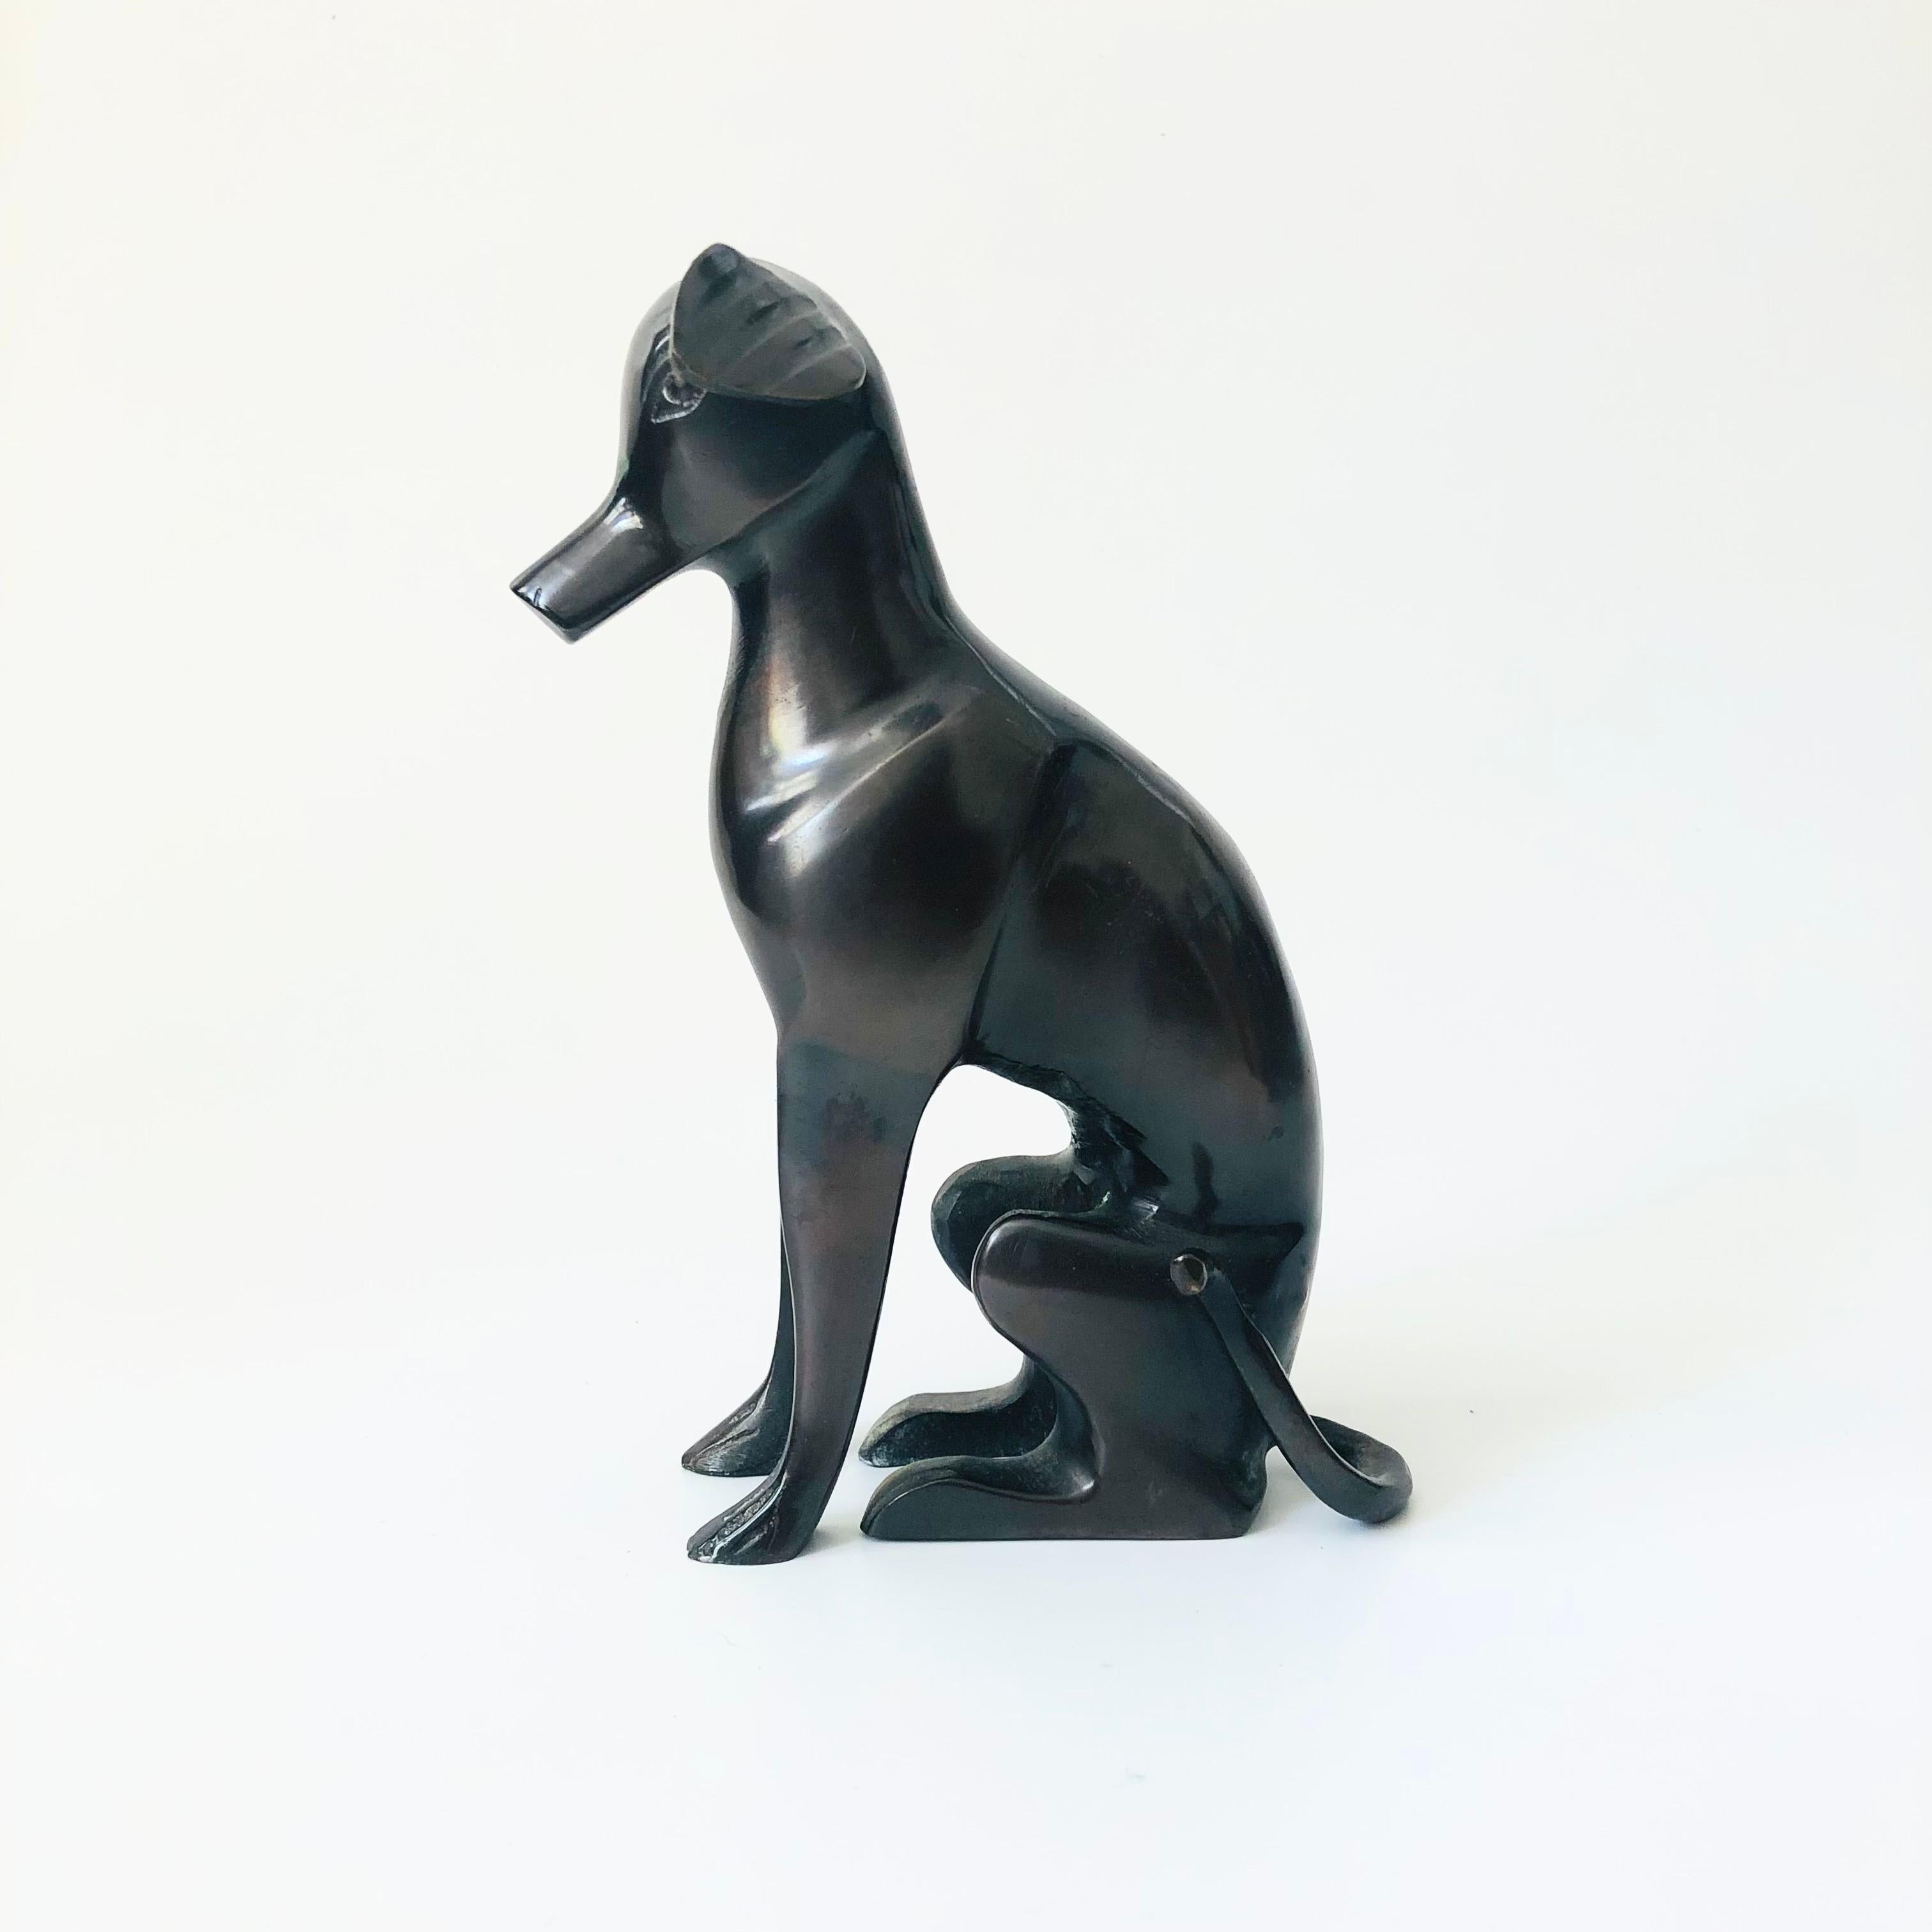 A vintage mid century bronze greyhound statue. Great mid century stylized design, dark coloring to the bronze. Made in Italy sticker attache to the base.

